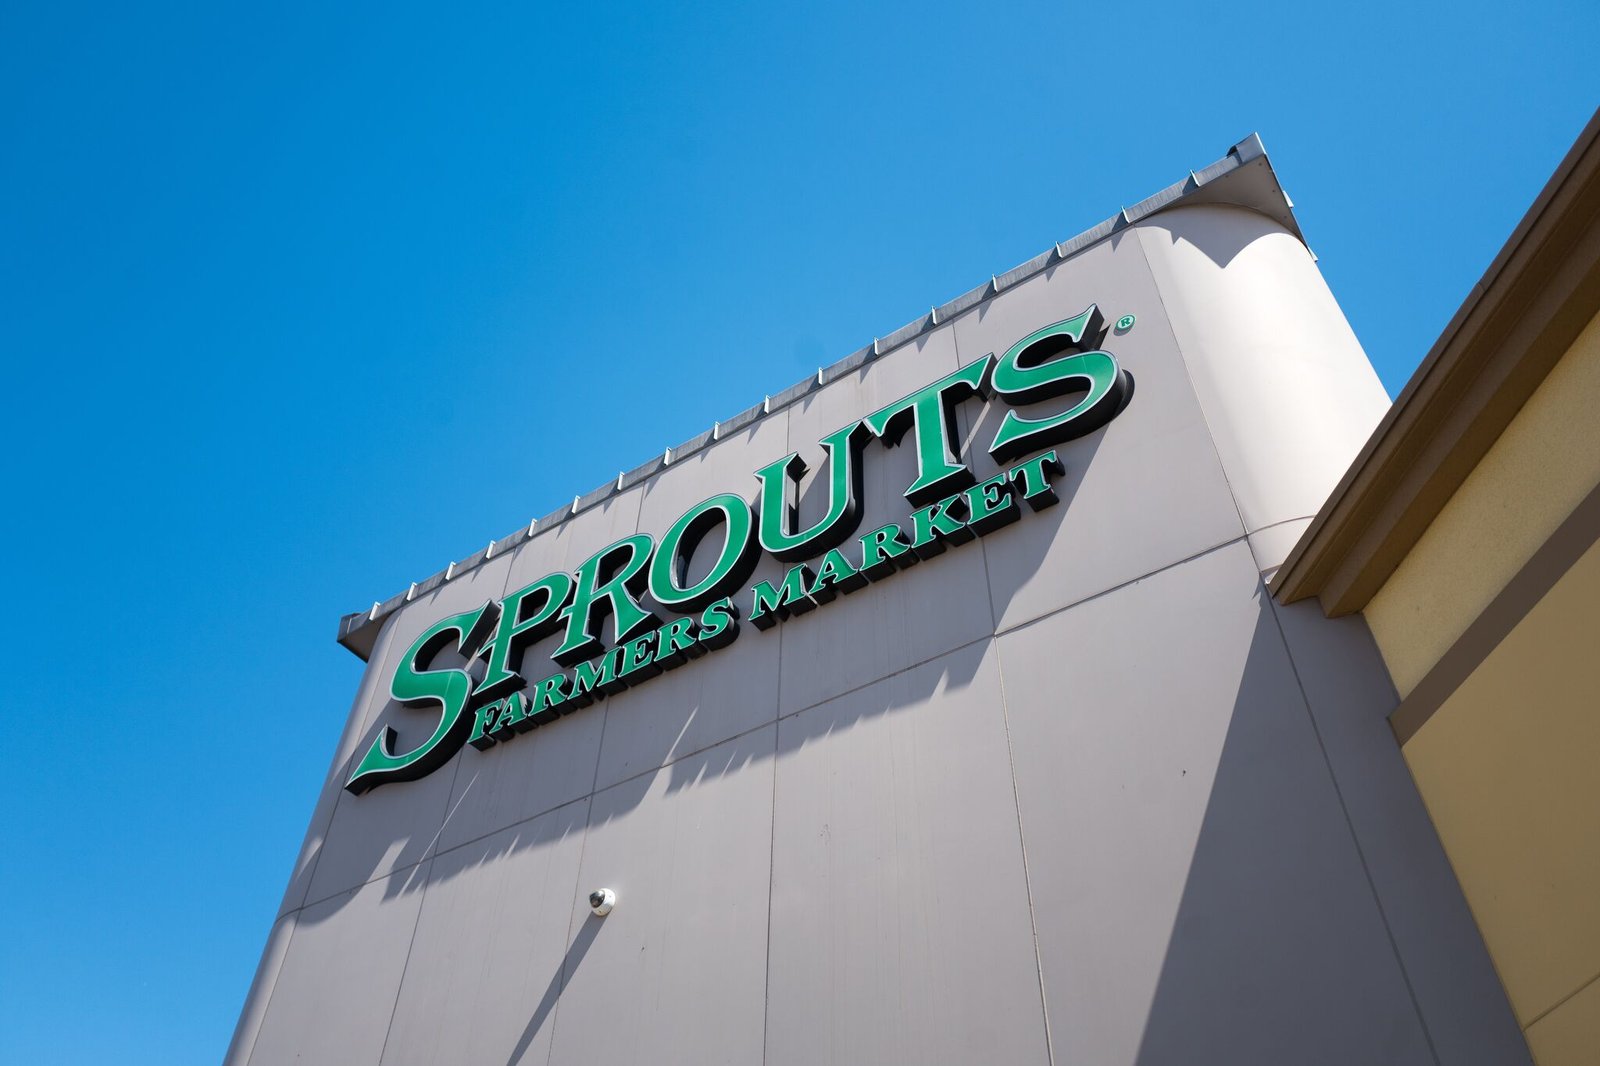 Sprouts is opening a new grocery store in the Bay Area